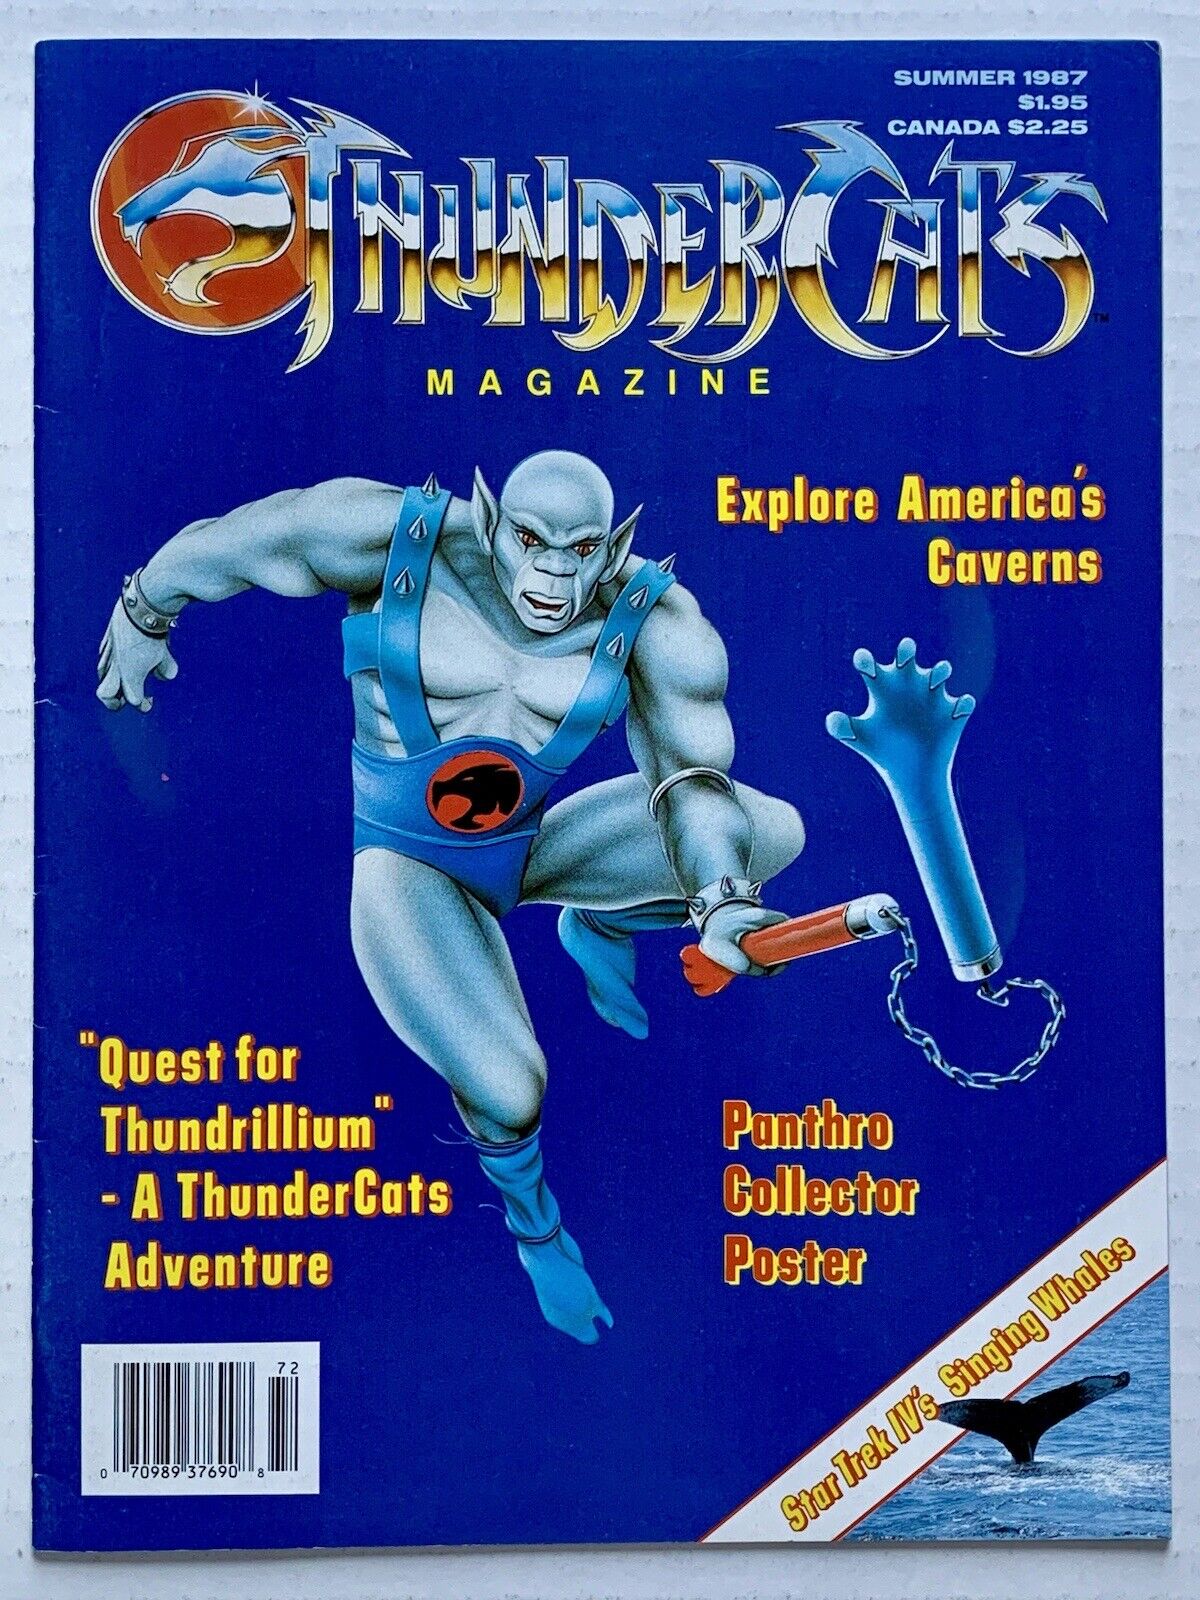 ThunderCats Magazine #3 (1987) with RARE Poster Intact (VF+/8.5) -VINTAGE